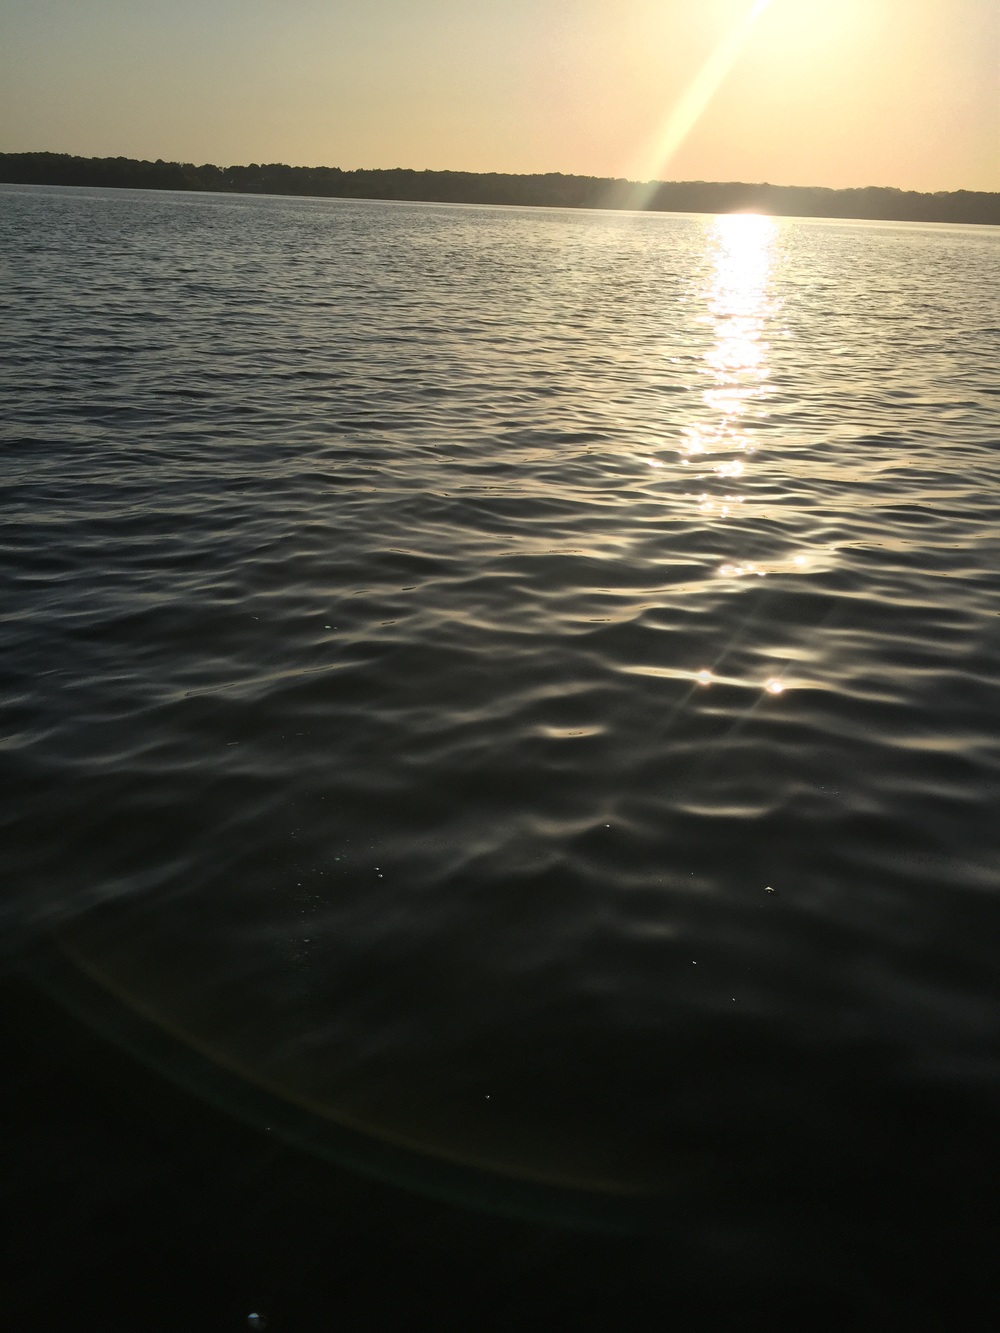    It was seriously the most gorgeous evening out on the lake! The sunset was beyond magical. Just wanted to let you see some of this gorgeous action. We had the best time!    I could stare at it for the rest of my life!!     